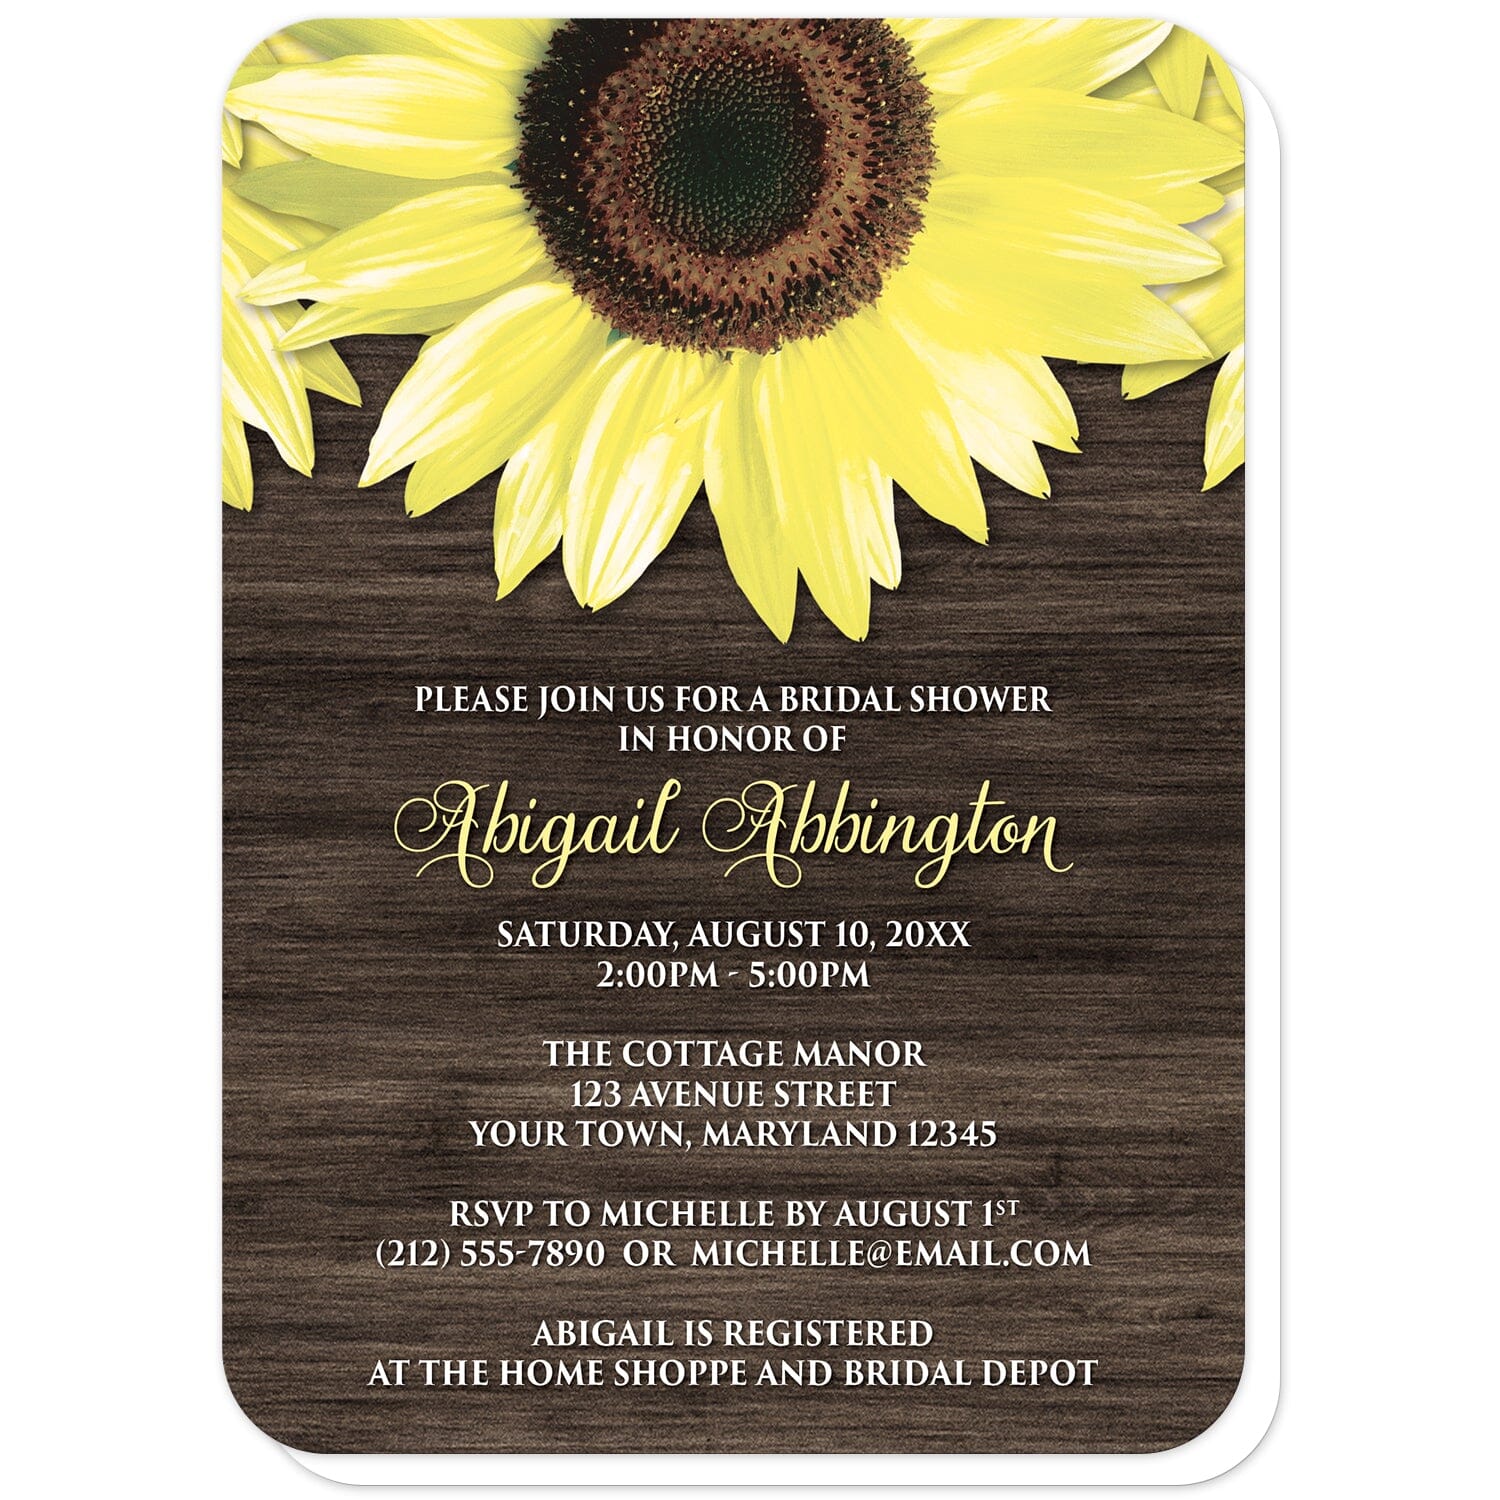 Rustic Sunflower and Wood Bridal Shower Invitations (with rounded corners) at Artistically Invited. Southern-inspired rustic sunflower and wood bridal shower invitations designed with large yellow sunflowers along the top over a country brown wood design. Your personalized bridal shower celebration details are custom printed in yellow and white over the brown wood background below the pretty sunflowers. 